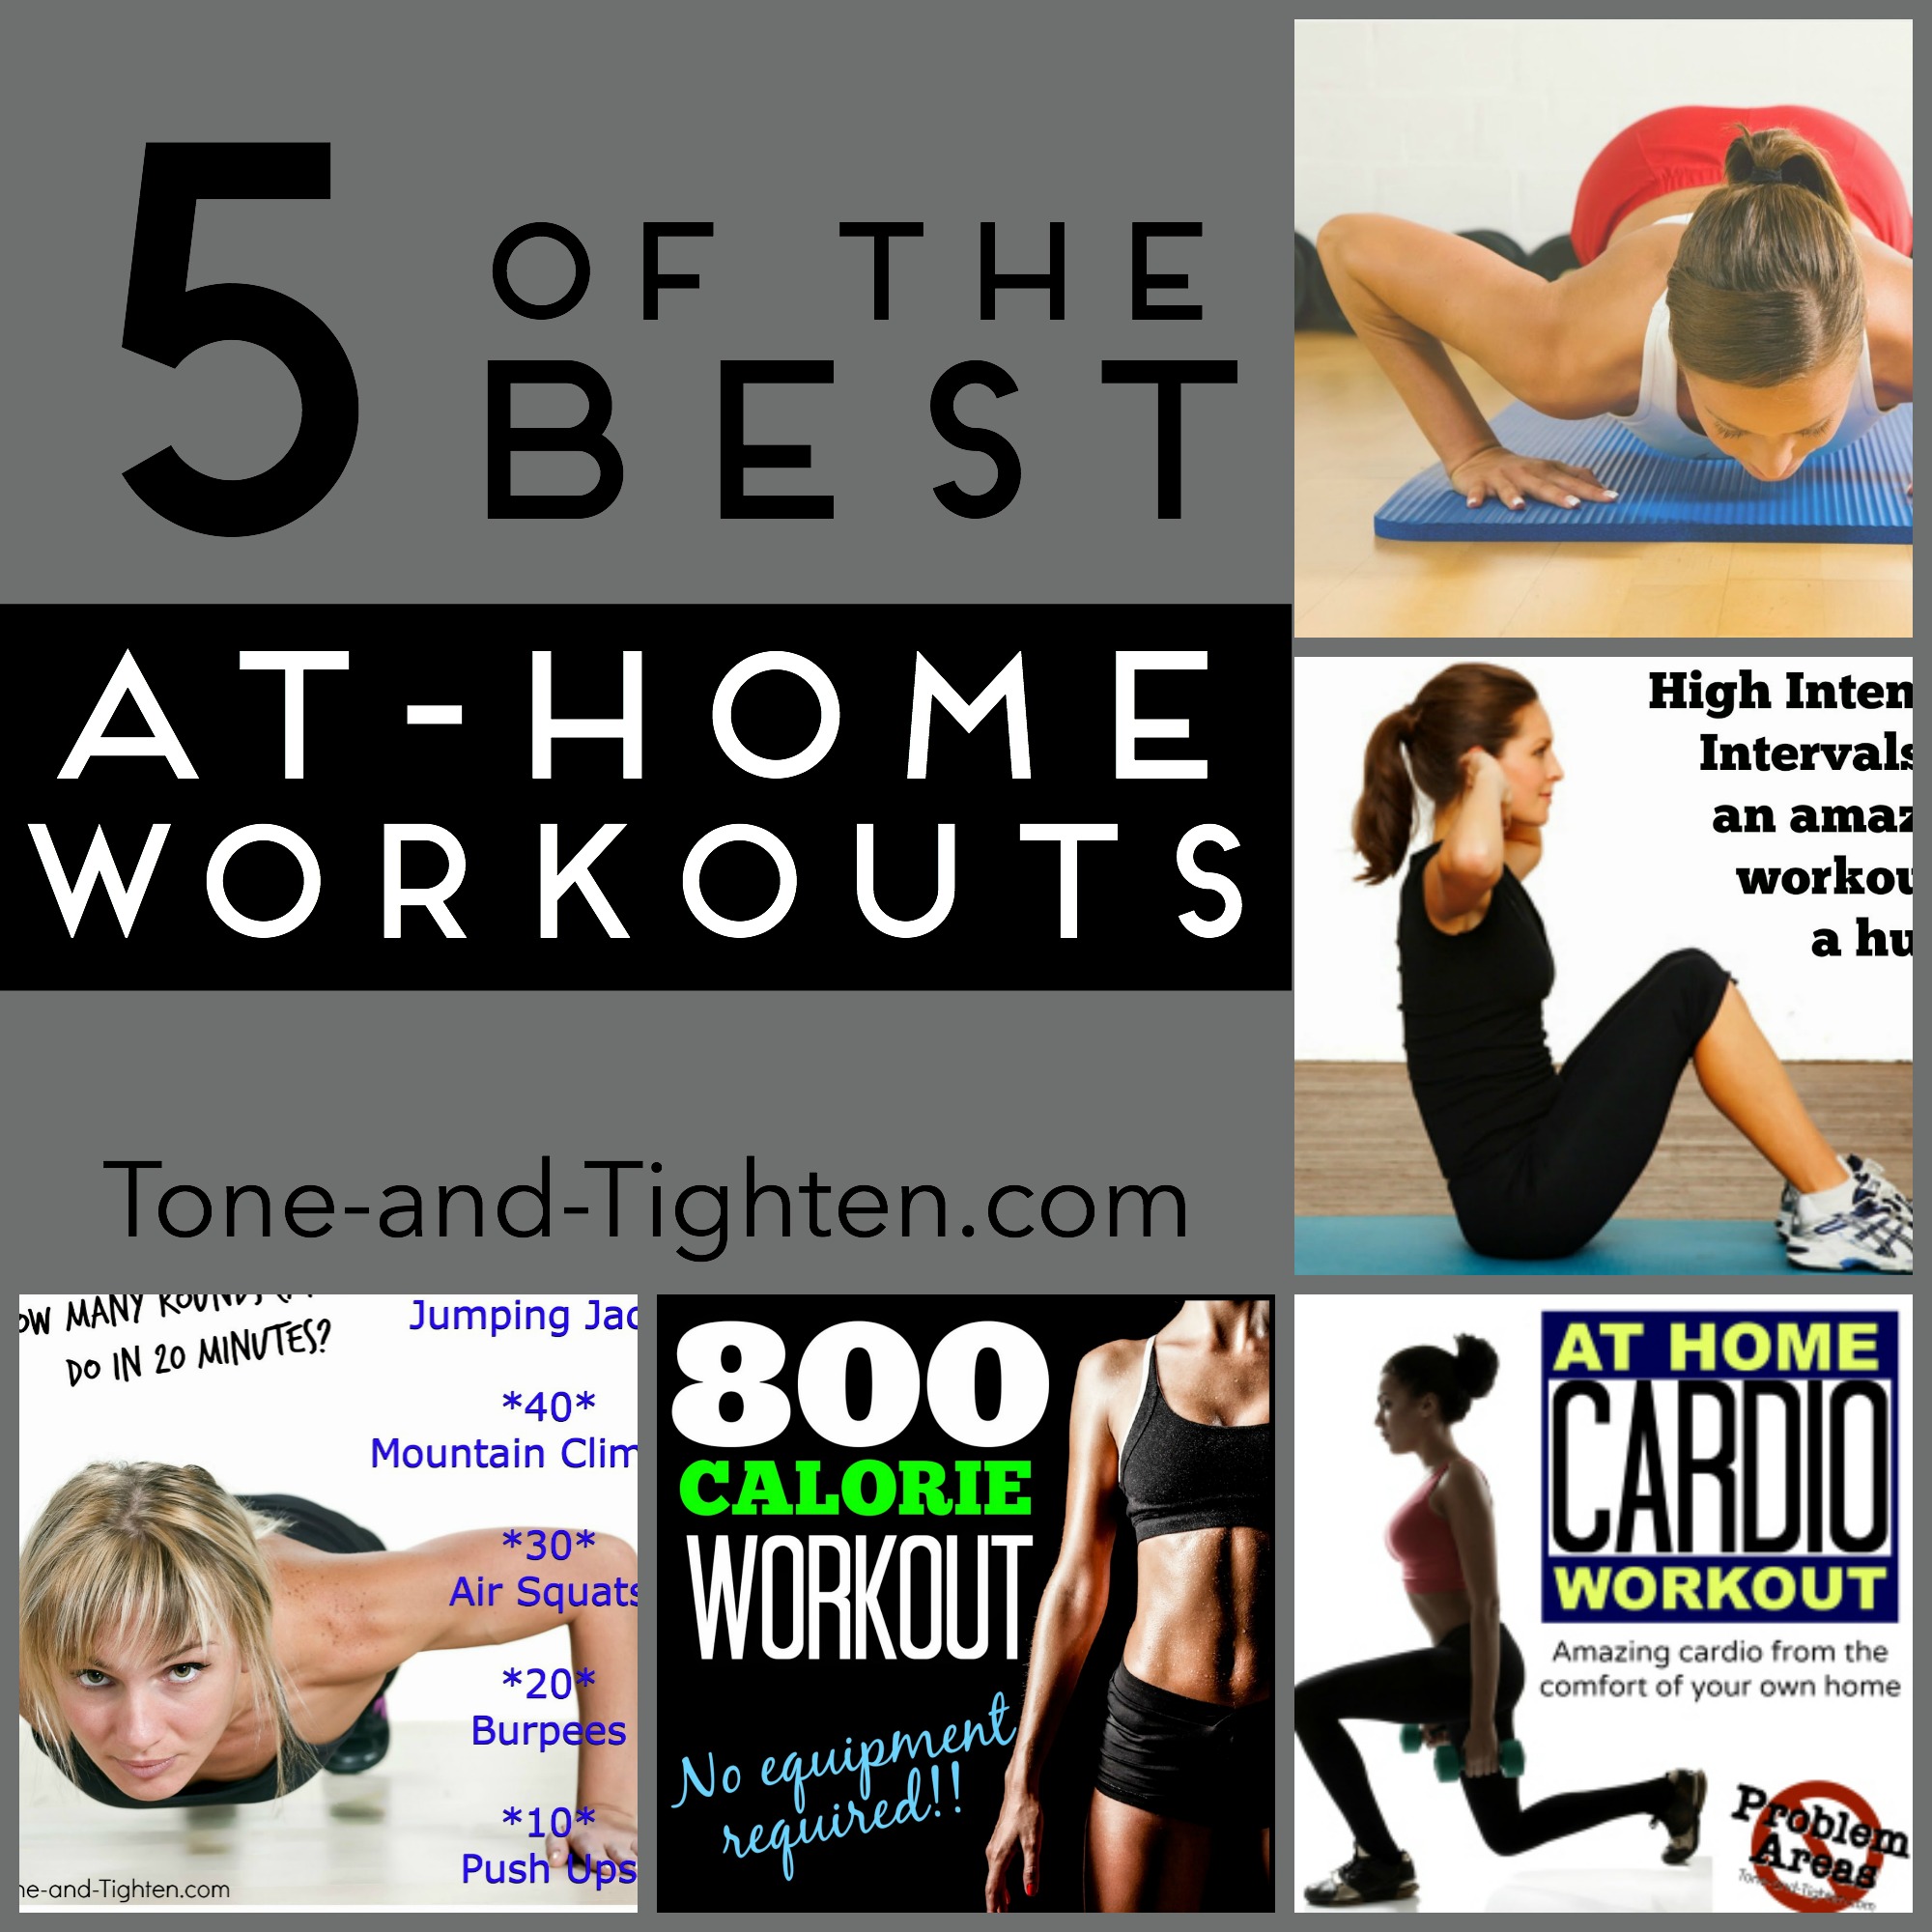 Weekly Workout Plan: 5 of the Best At-Home Workouts